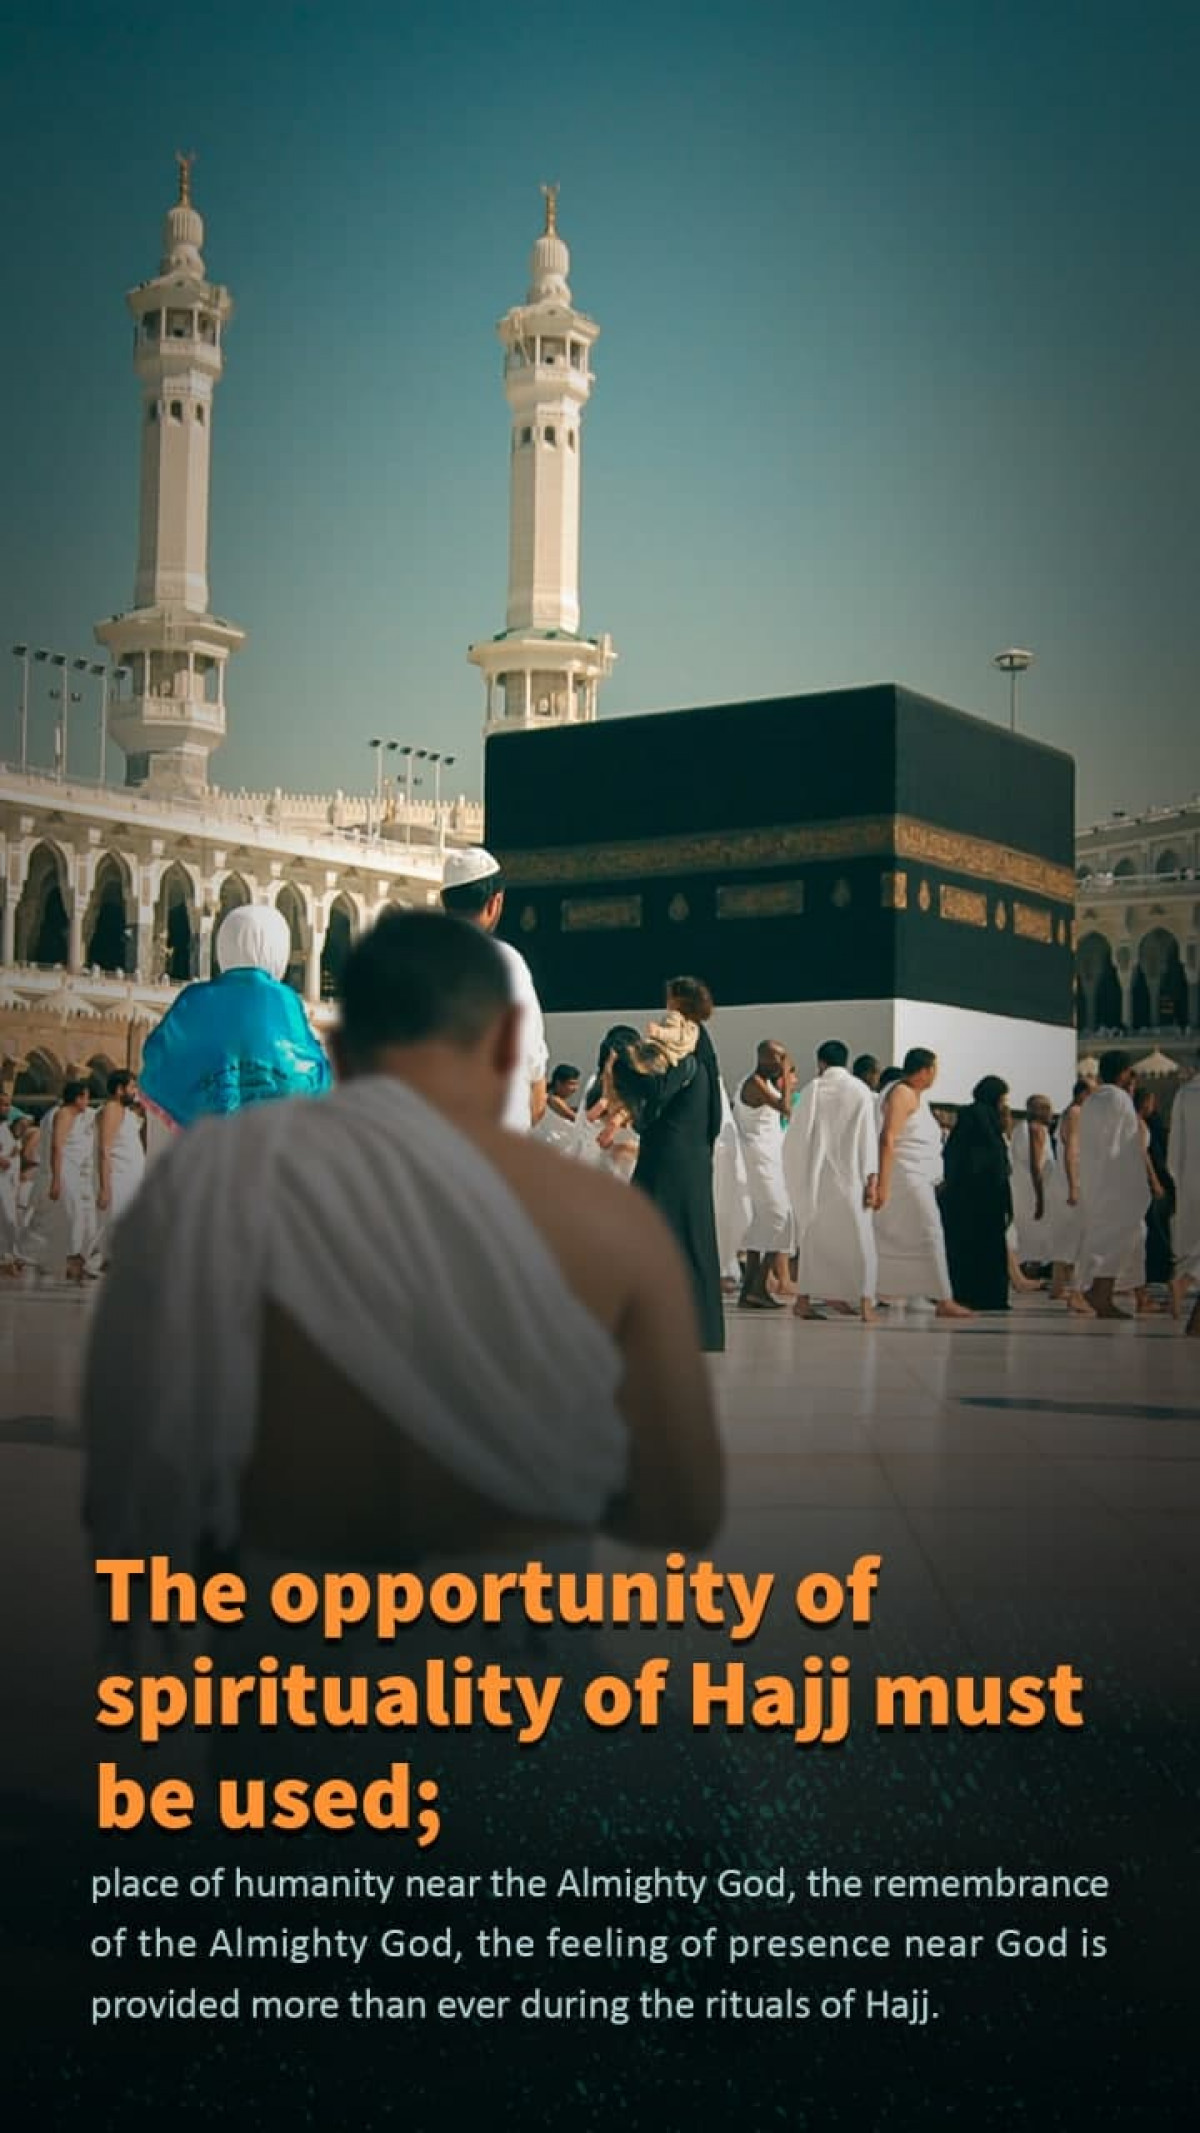 The opportunity of spirituality of Hajj must be used